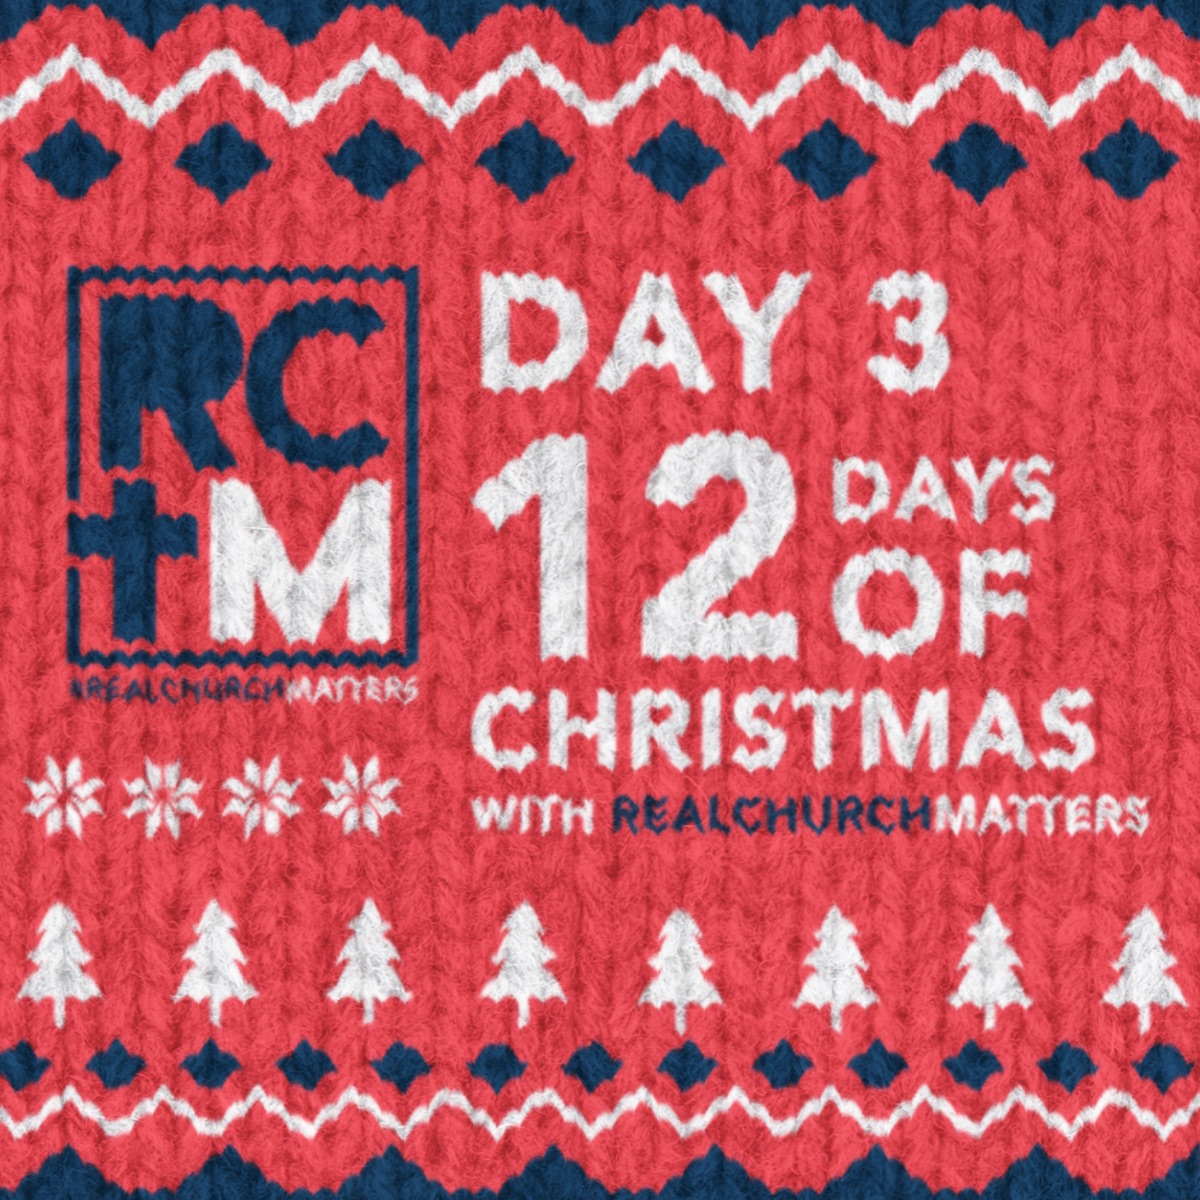 Day 3 of the 12 Days of Christmas with Real Church Matters